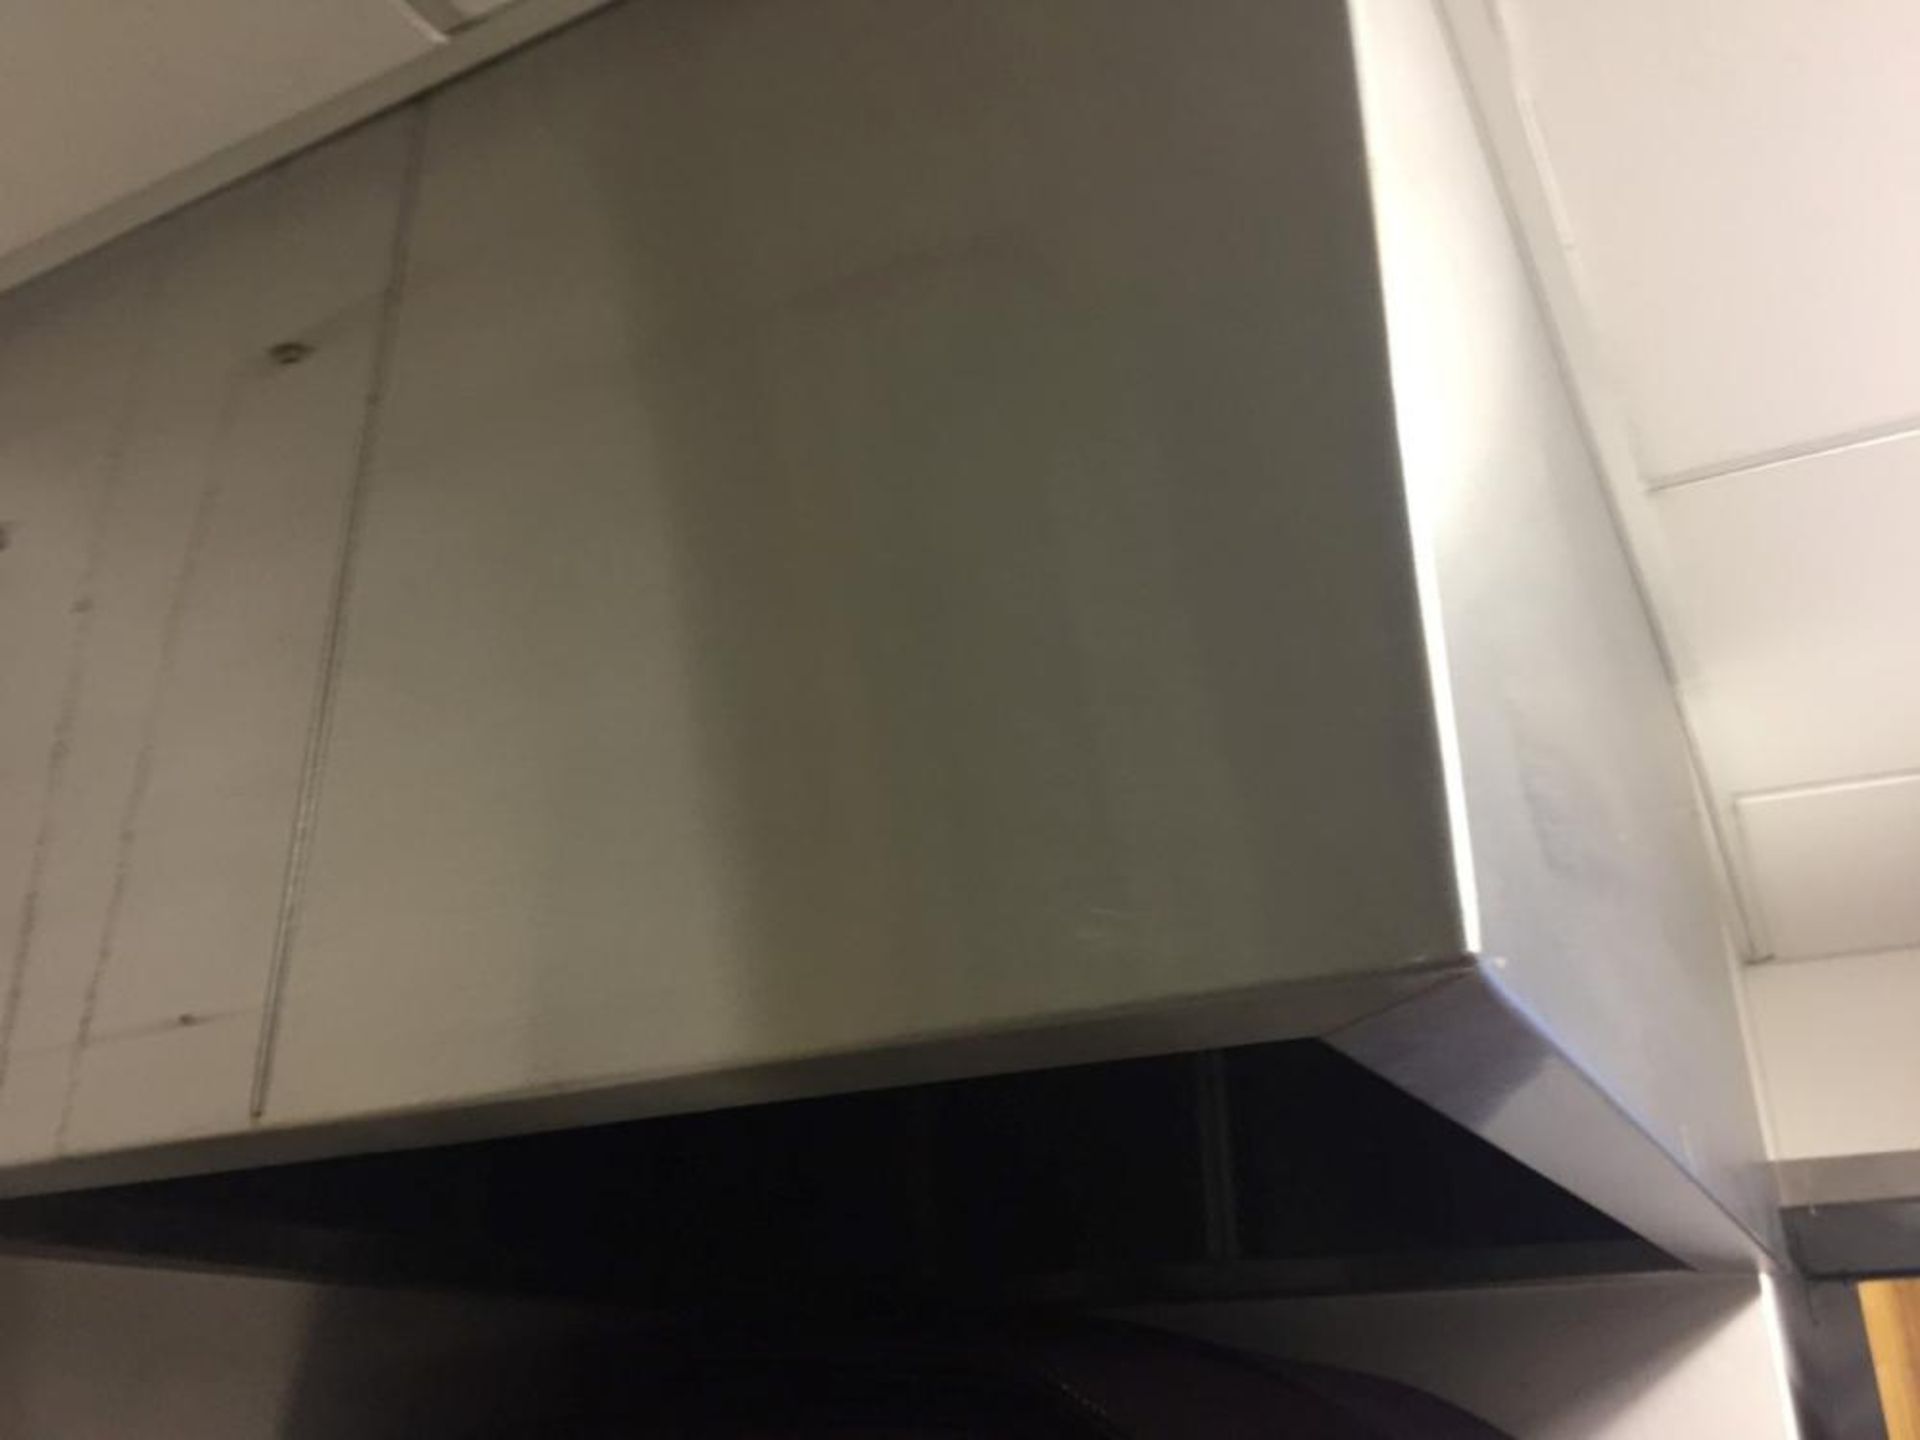 1 x Commercial Stainless Steel Extractor Hood - Dimensions: W90 x D75 x H50cm - CL191 - Location: Le - Image 2 of 3